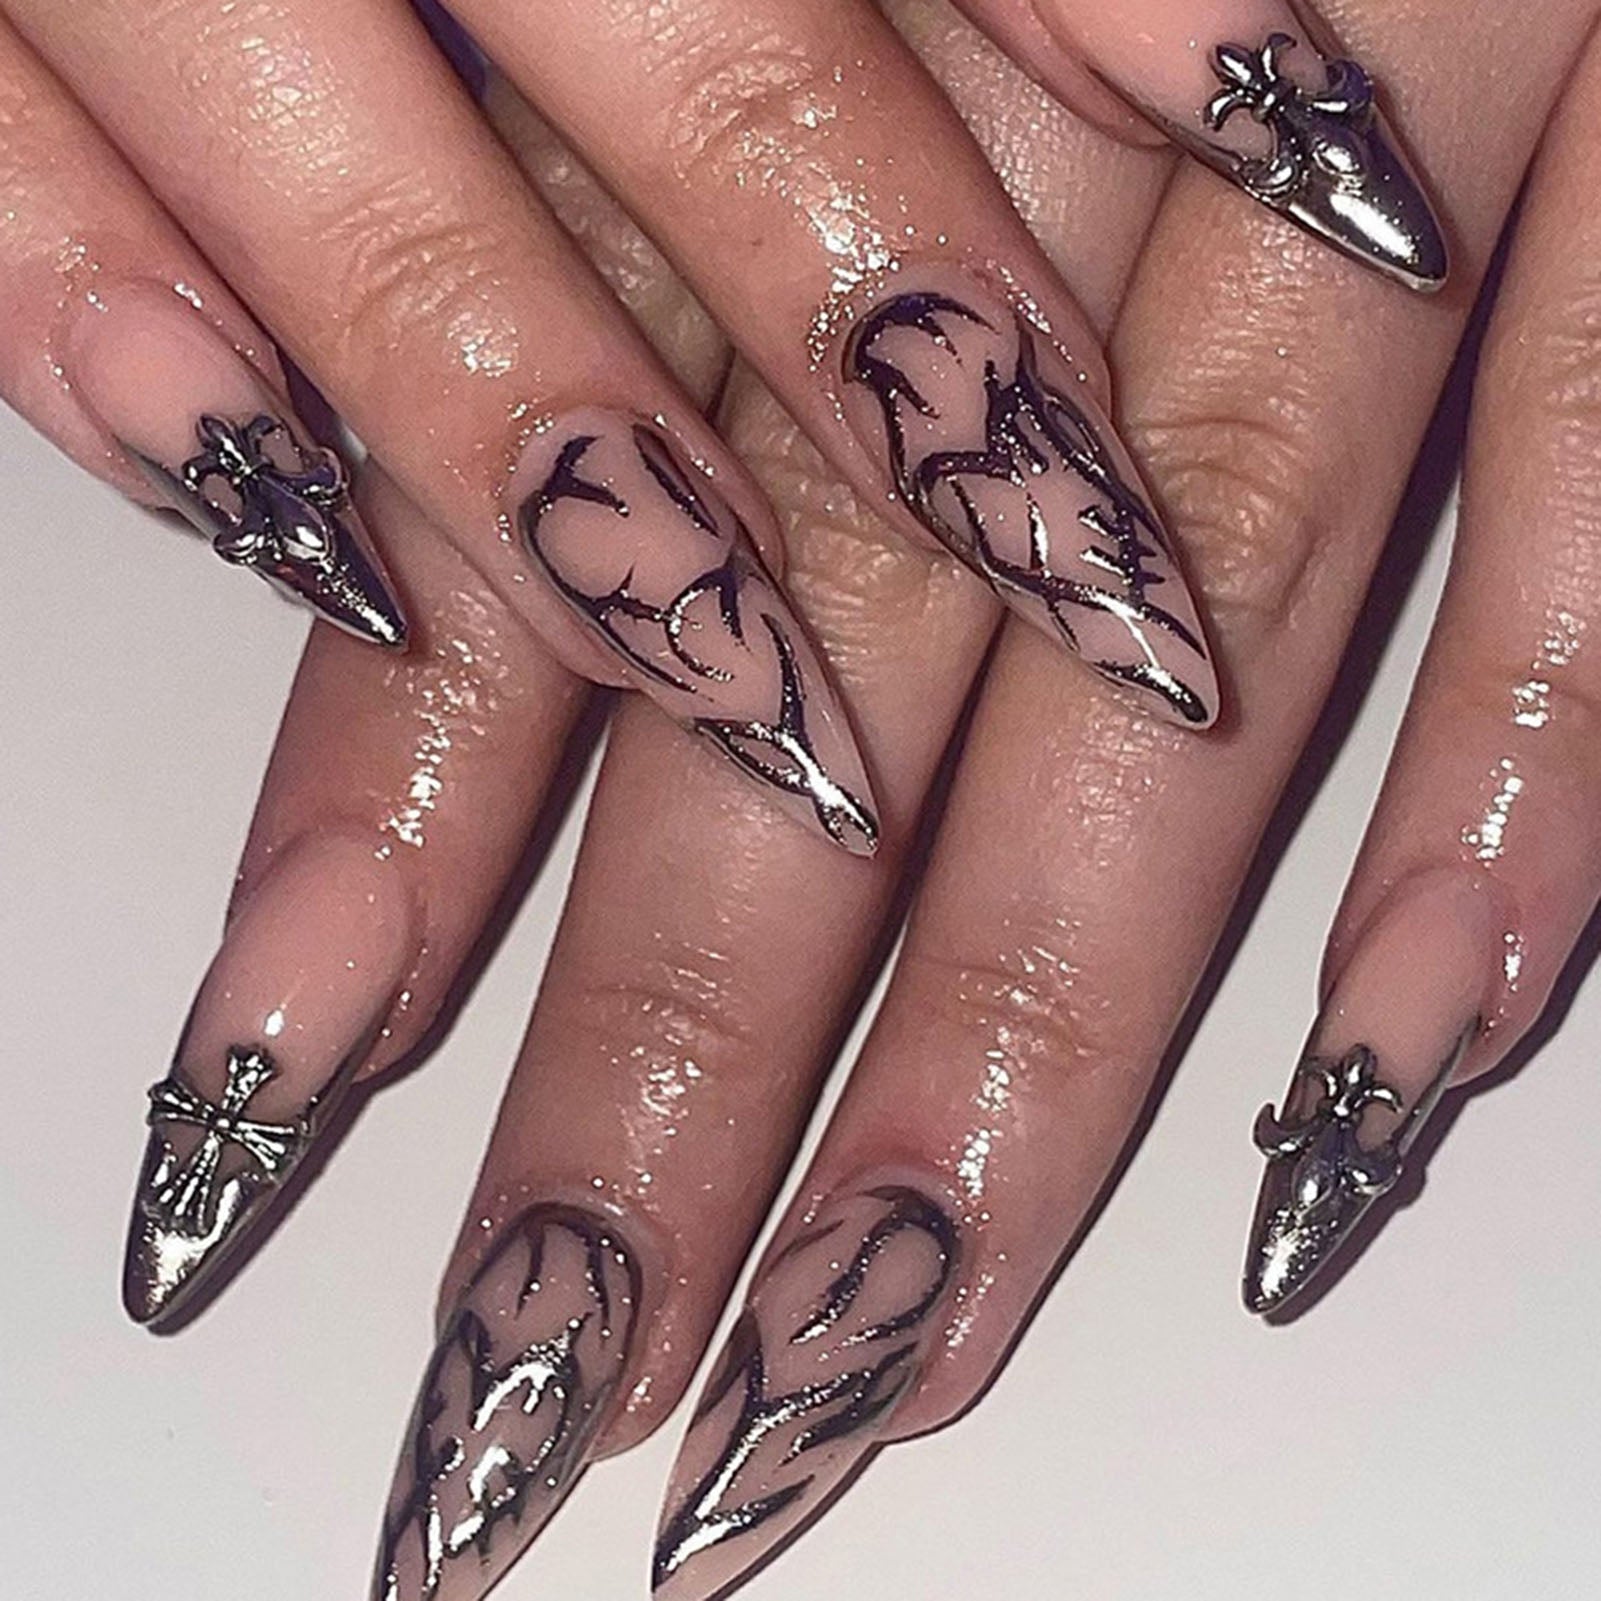 Flytonn Fall/Winter Ambiance  24pcs French Style False Nails With Glue Temperament 3D Saturn Designs Diamond Fake Nails Full Cover Press On Long Coffin Nails